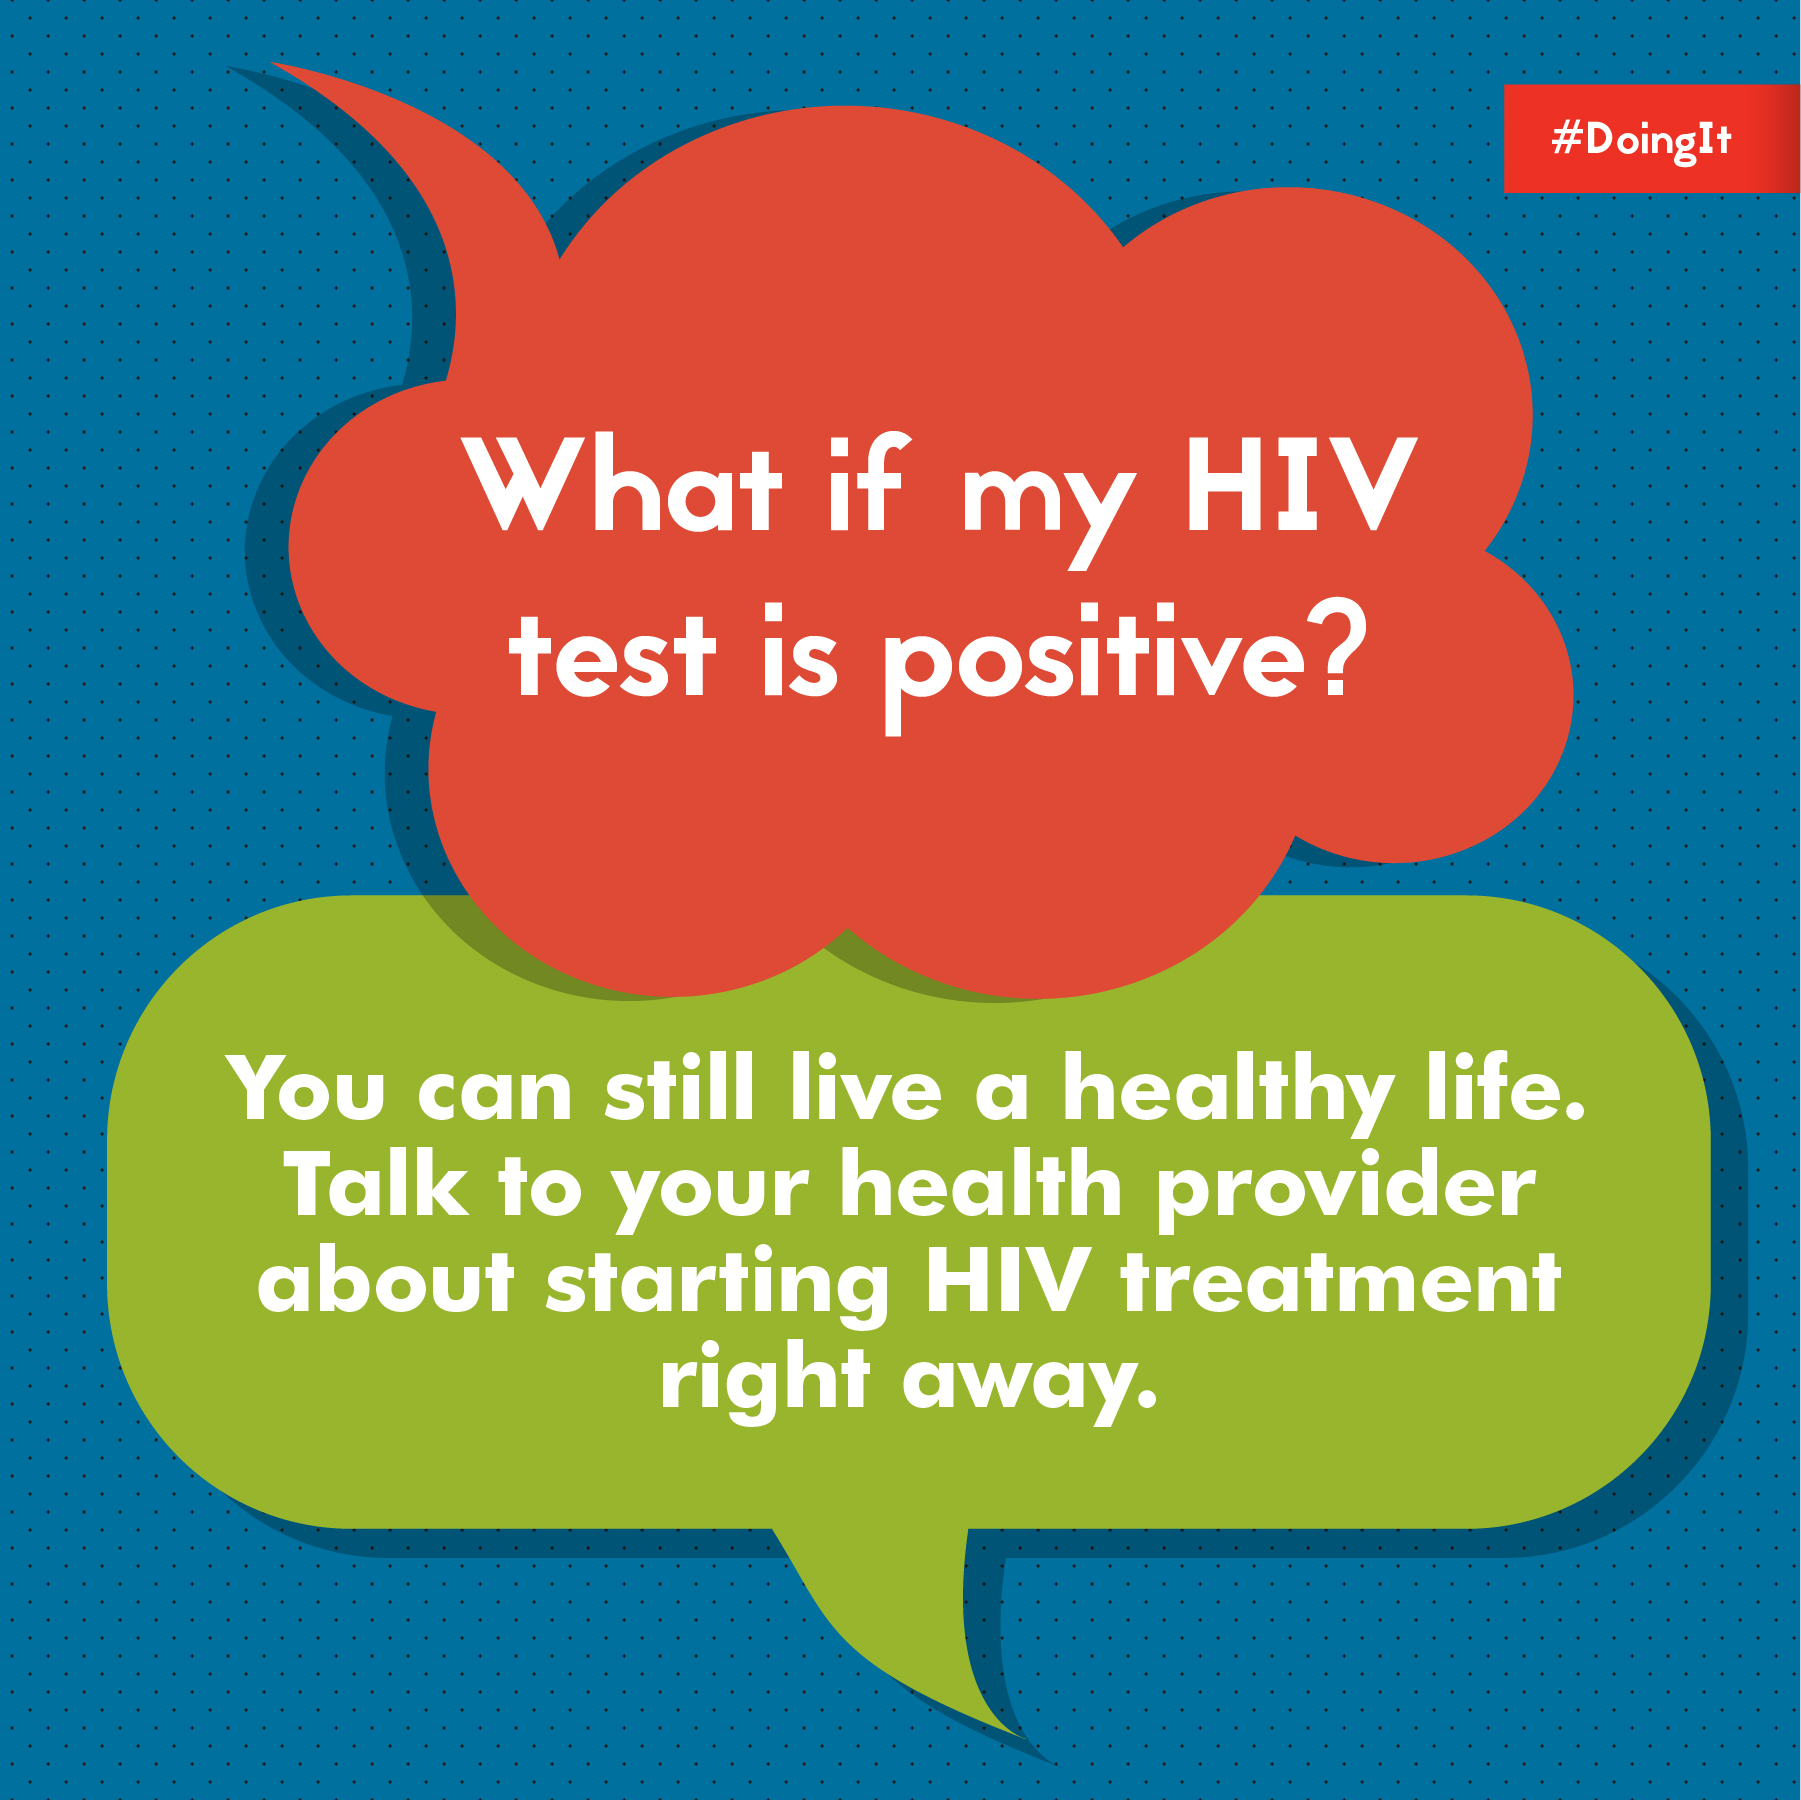 Image displays animation of two thoughts bubbles (one that reads, “What if my HIV test is positive?” and another that reads, “You can still live a healthy life. Talk to your provider about starting HIV treatment right away.”).